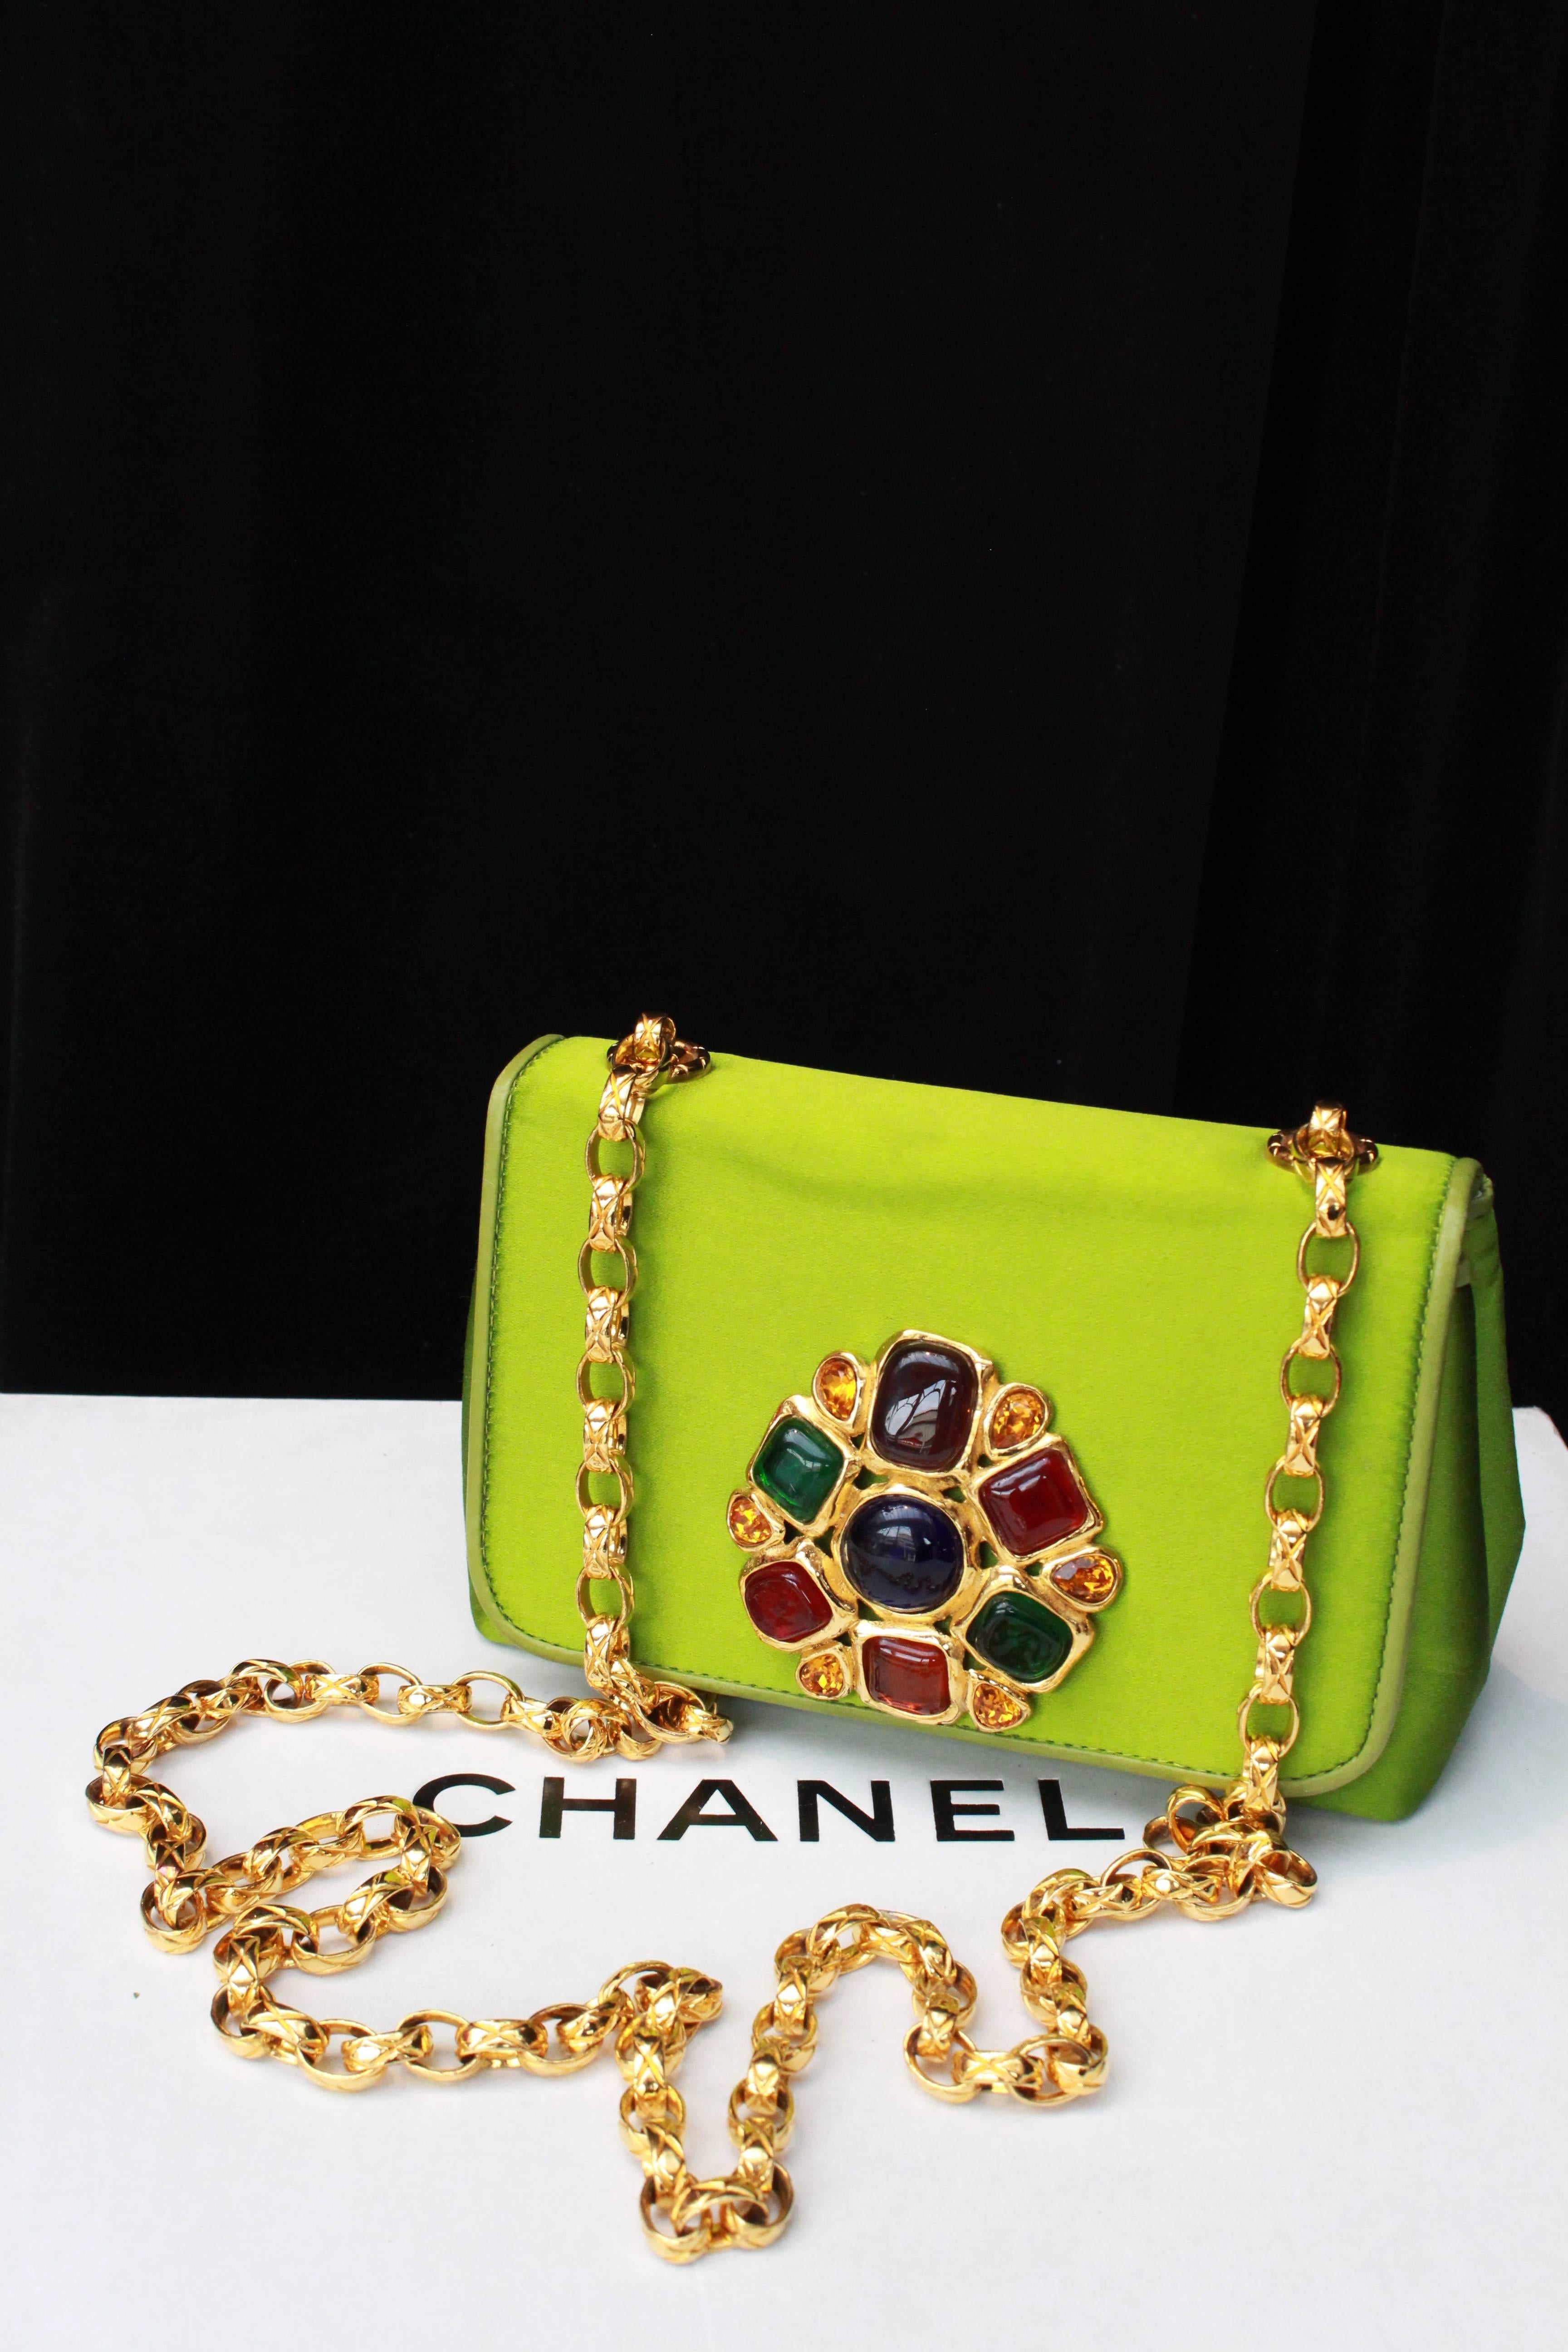 CHANEL (Made in Italy)  – Green satin jewel evening shoulder bag. The flap is embellished with a gilded metal jewel paved with ruby, emerald, sapphire and amber glass paste cabochons. The long gilded metal shoulder strap is made of quilted links.